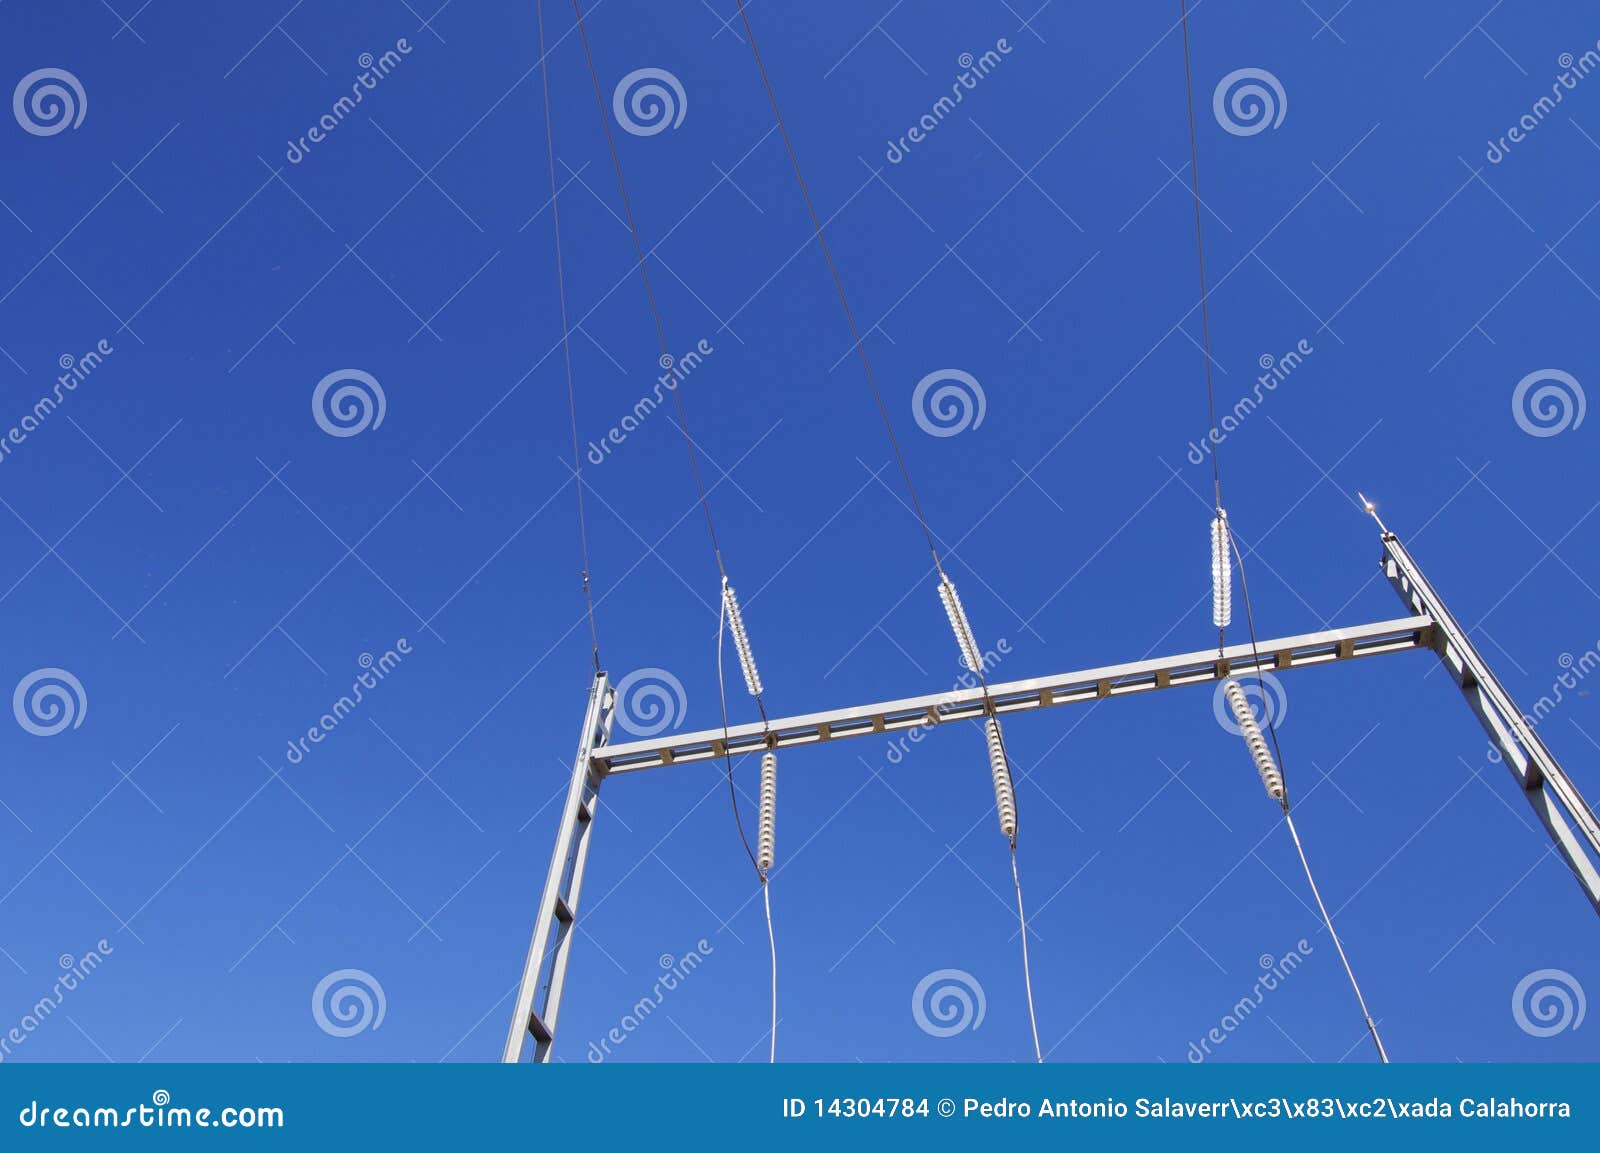 Wiring stock photo. Image of high, infrastructure, copyspace - 14304784